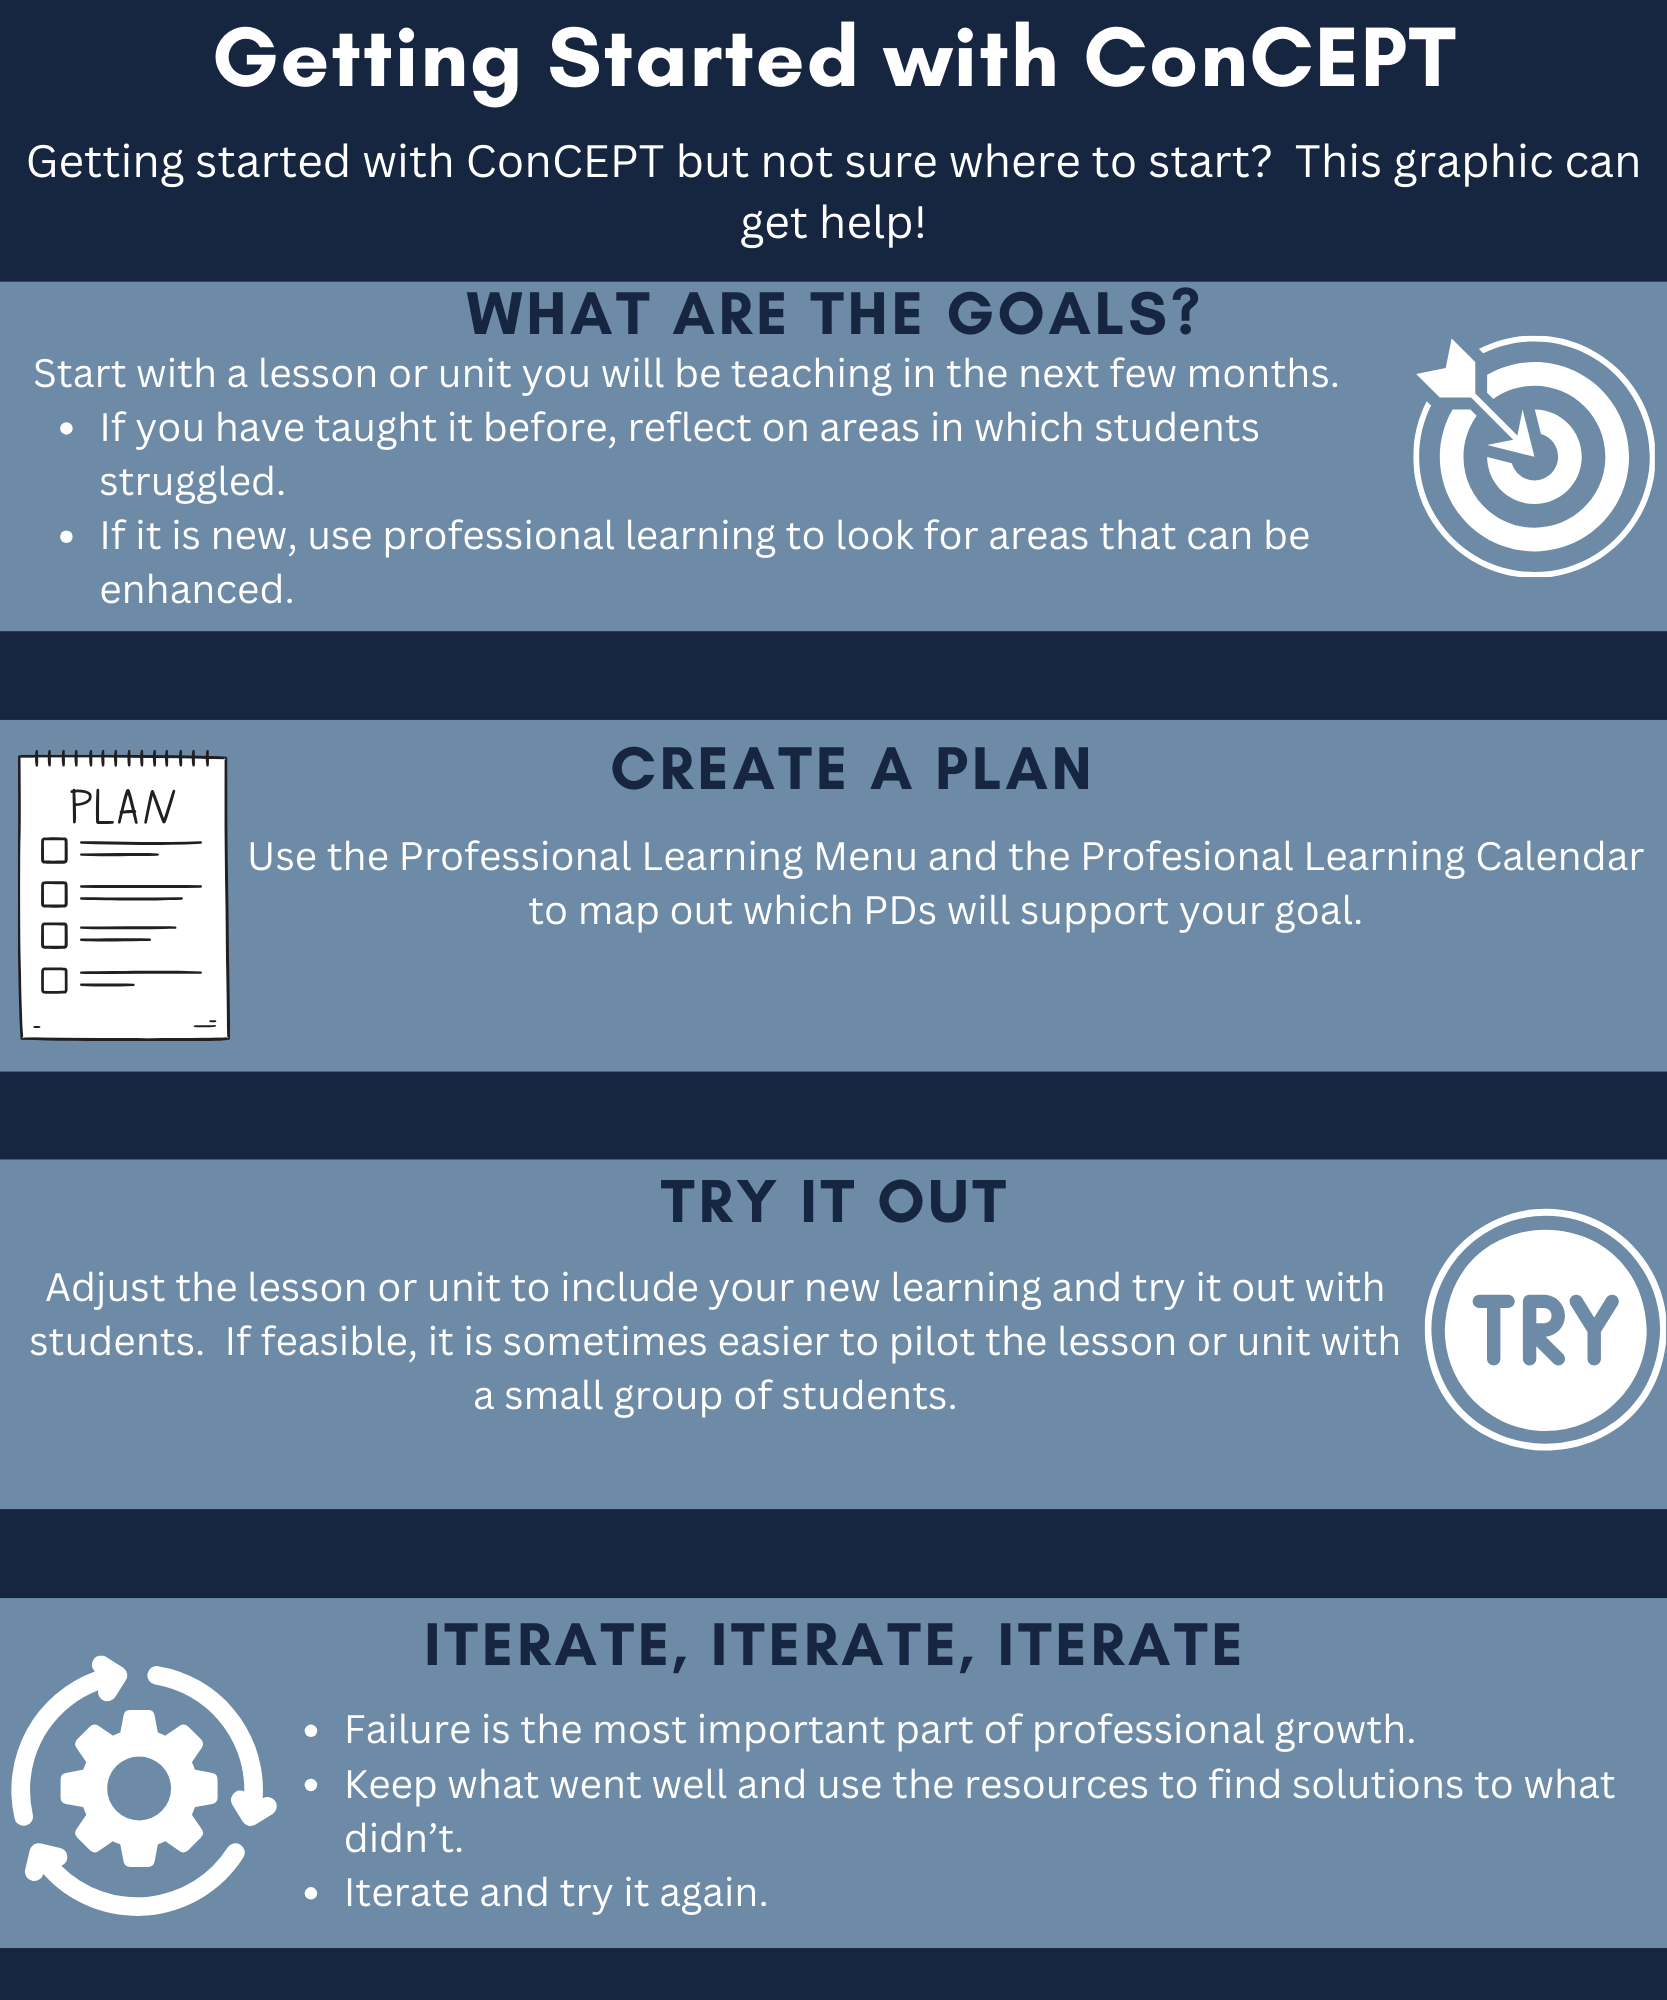 Getting Started with ConCEPT inforgraphic